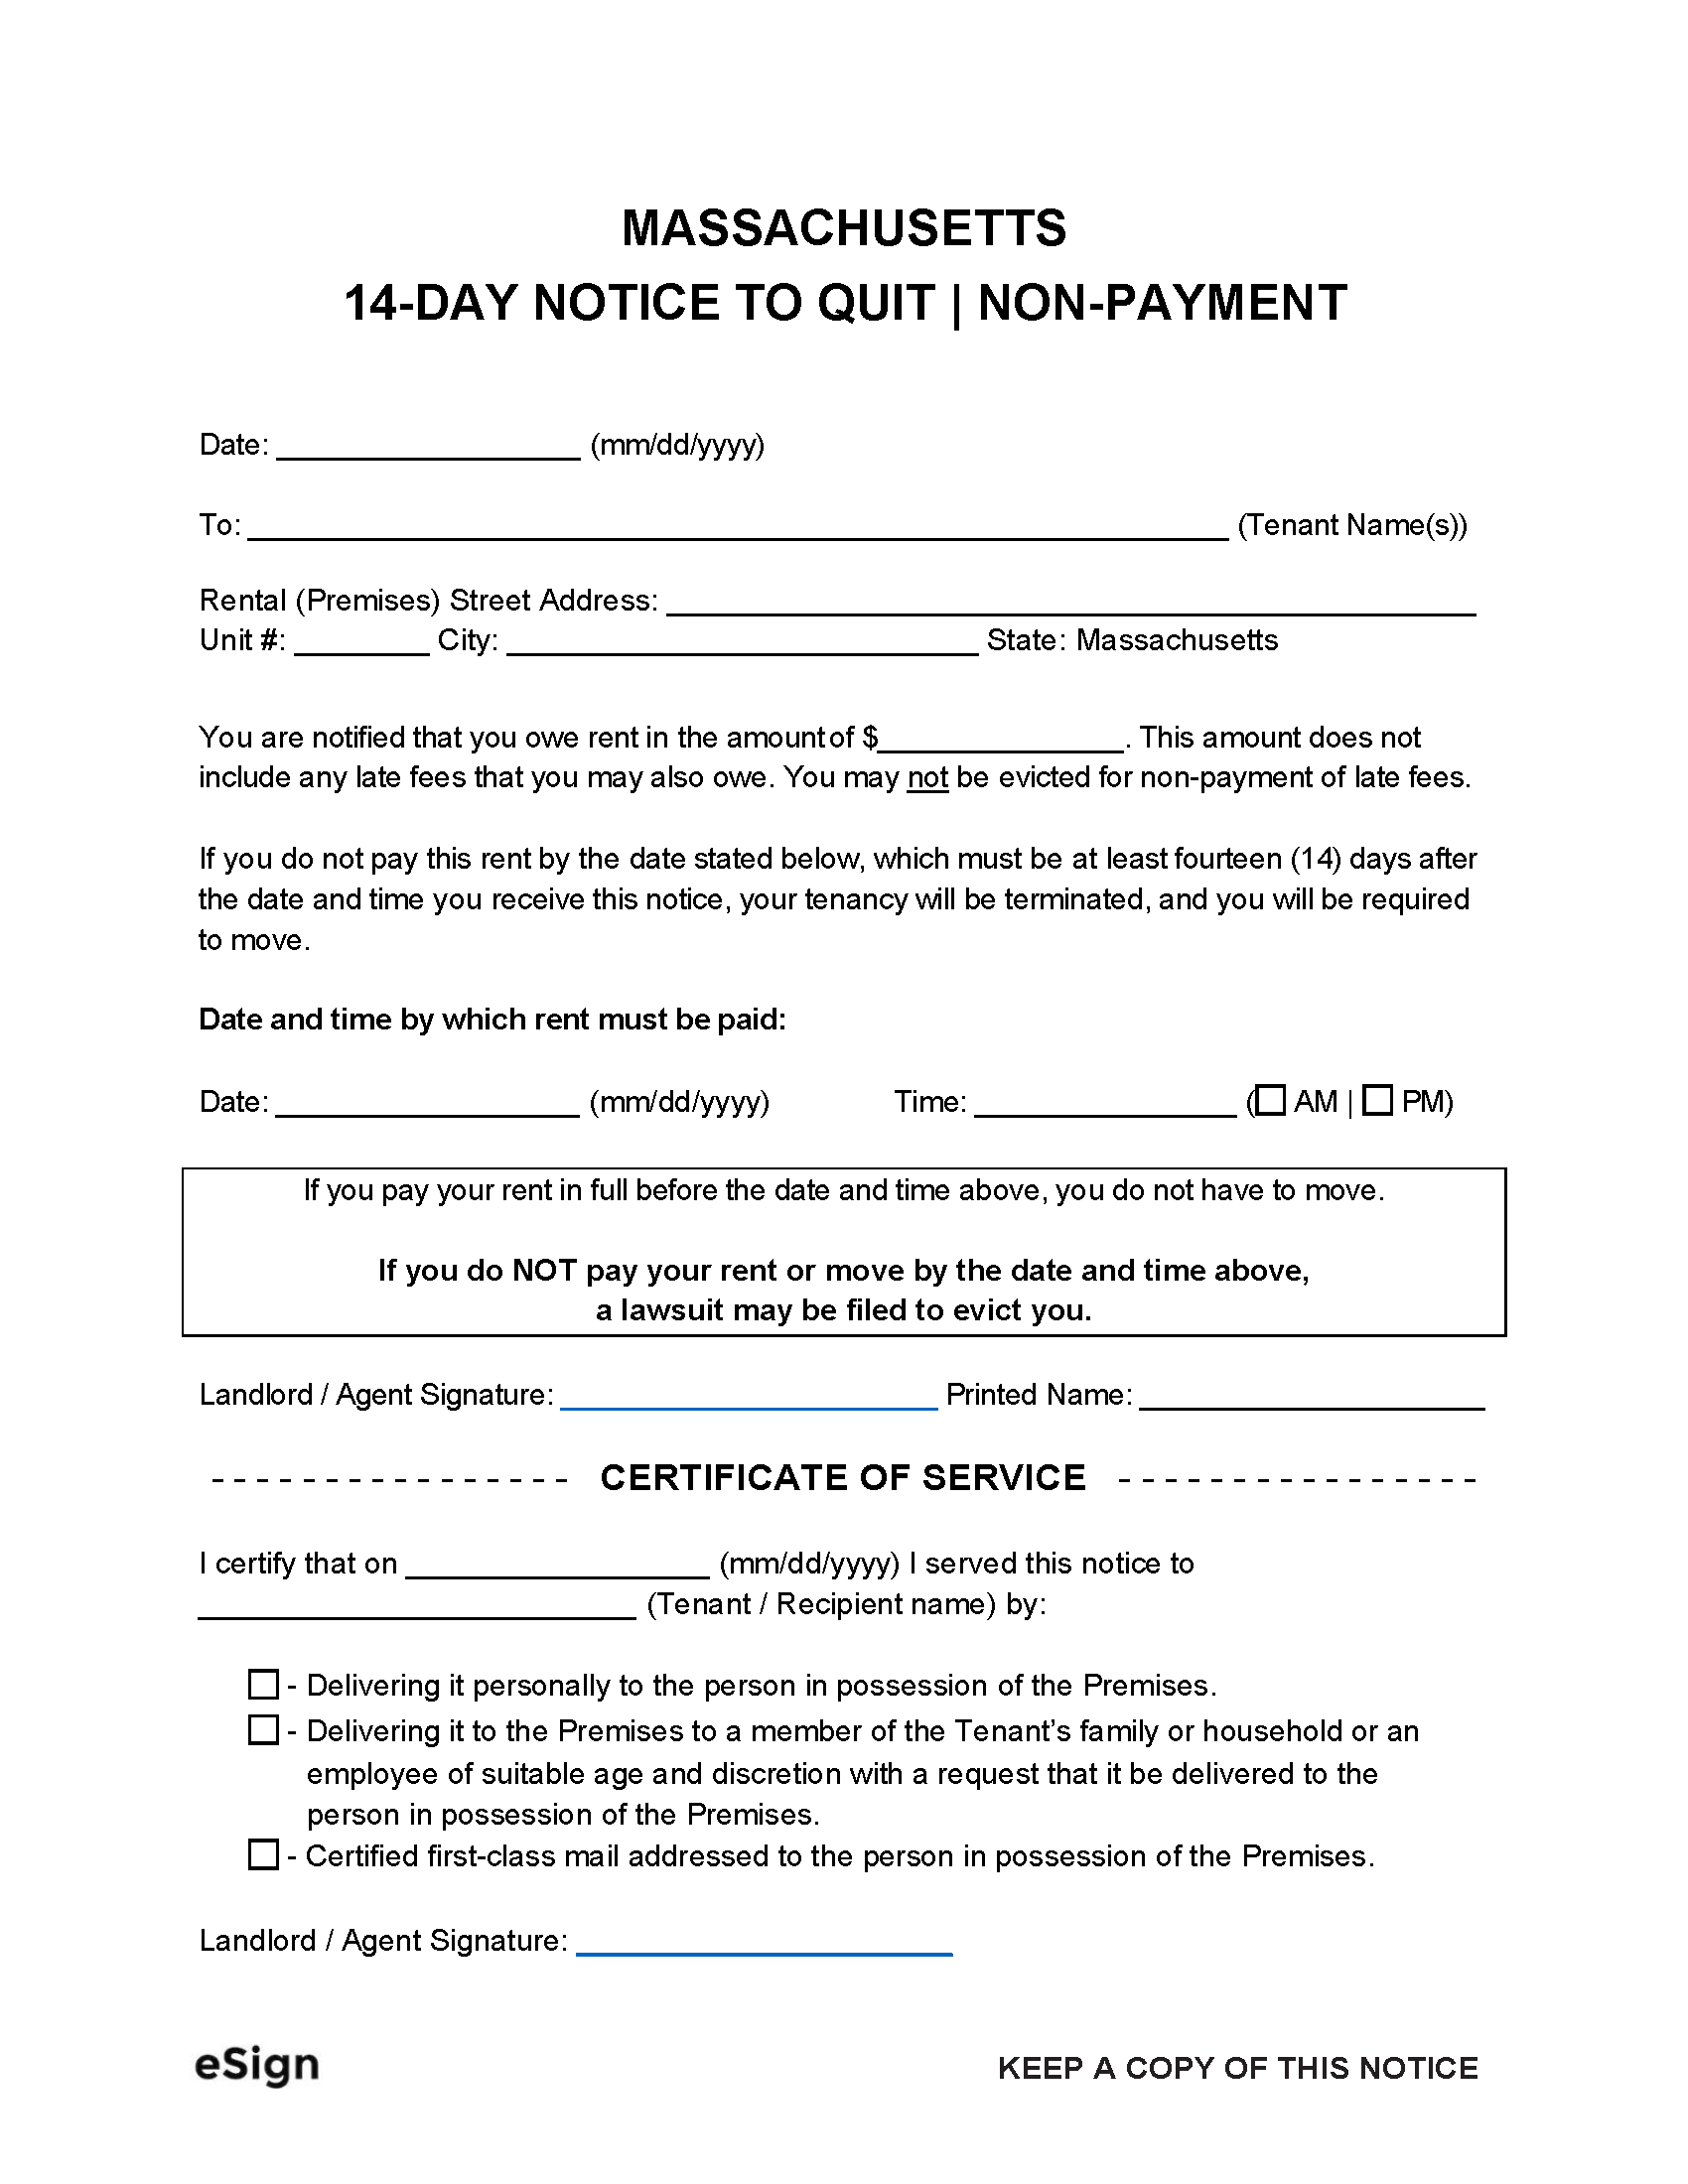 Free Massachusetts 14 Day Notice To Quit Non Payment Fixed Term 